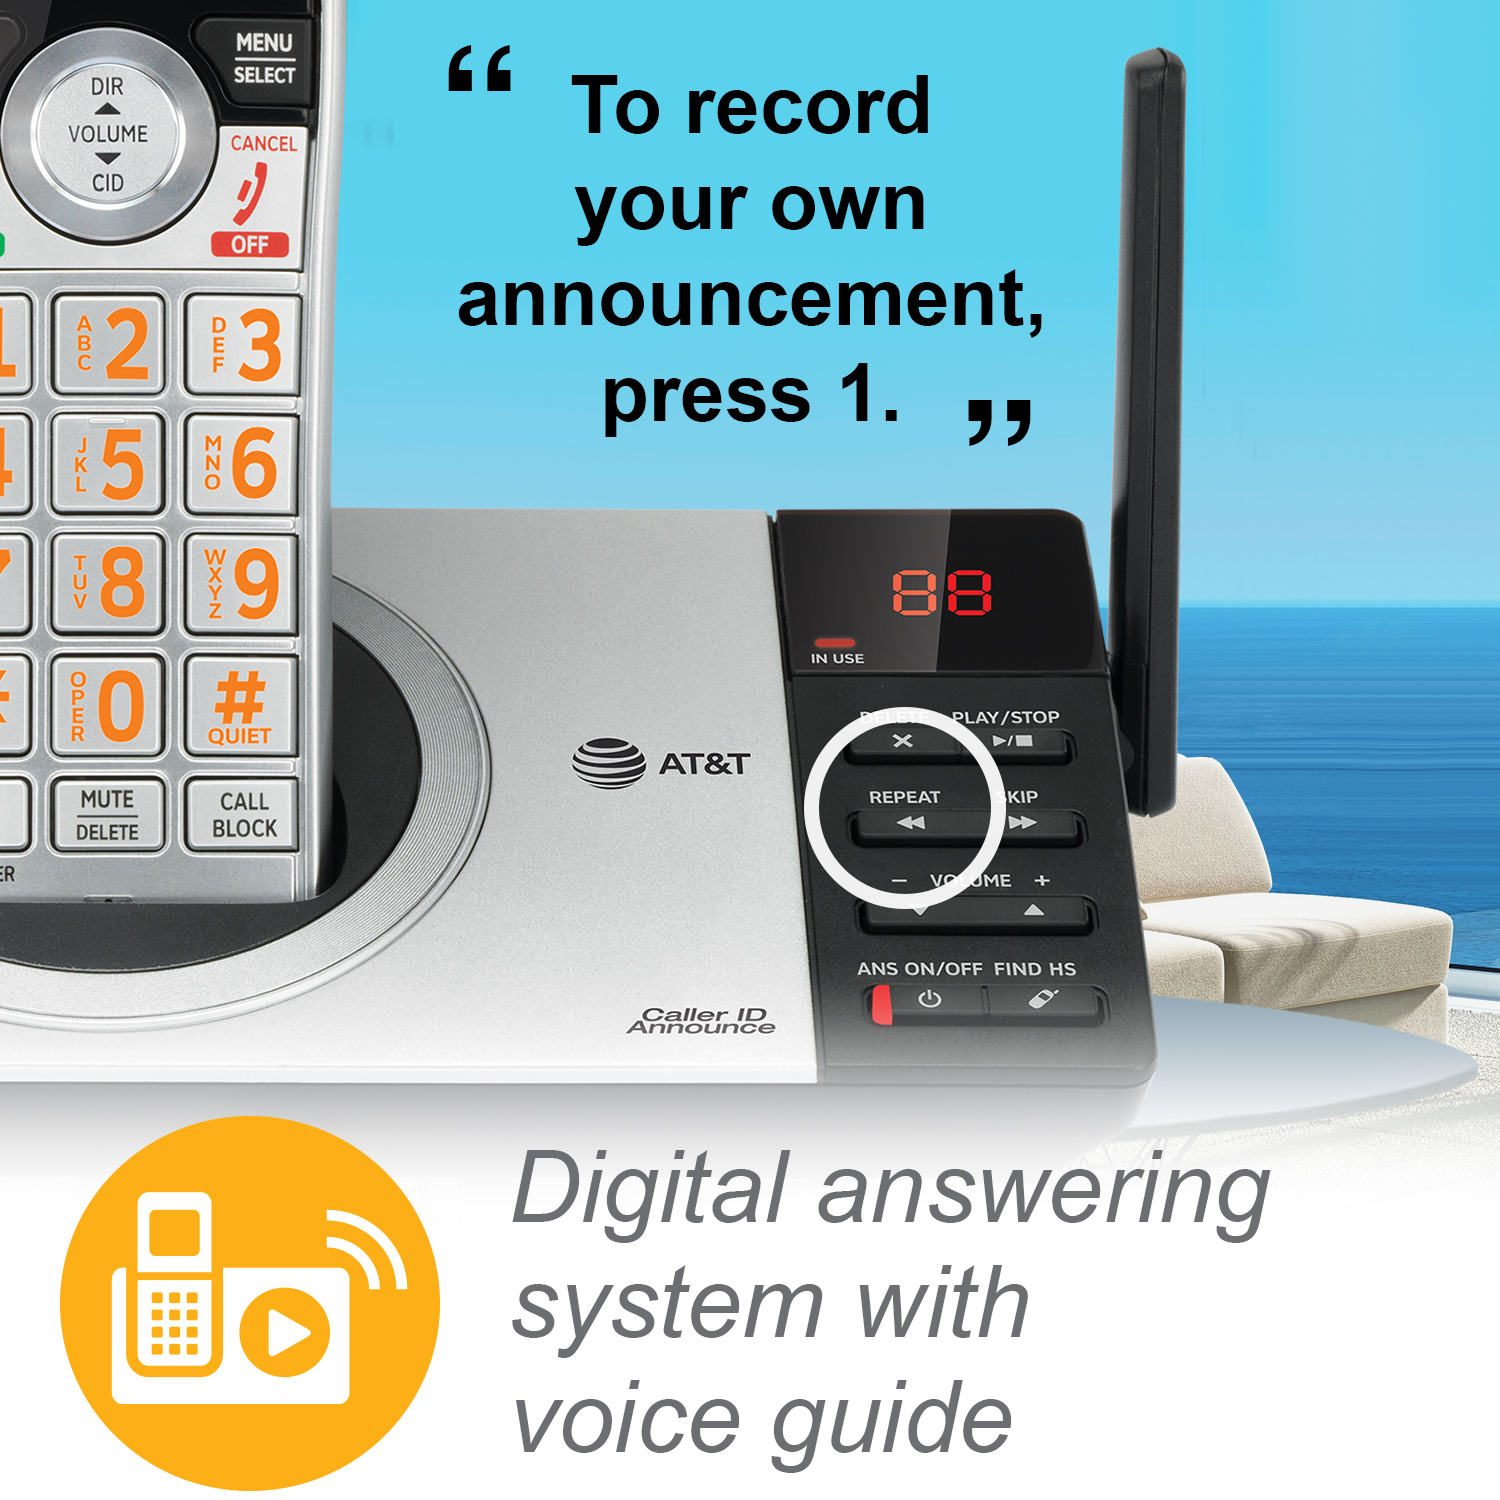 3 handset cordless answering system with cordless headset - view 8